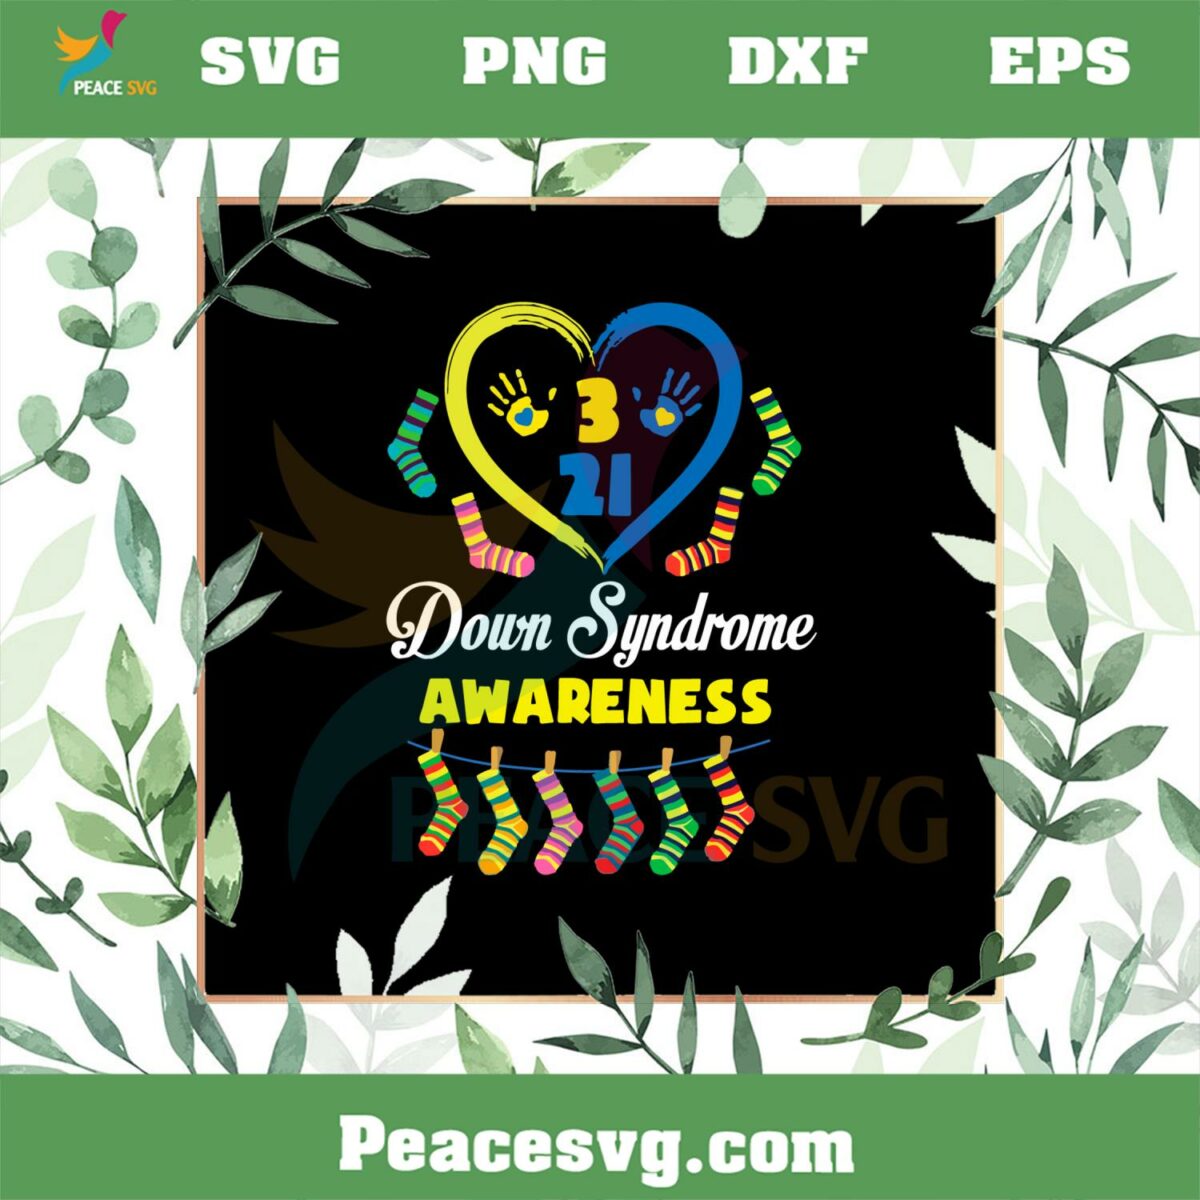 Down Syndrome Awareness Down Love 3 21 Rock Your Socks SVG Cutting Files